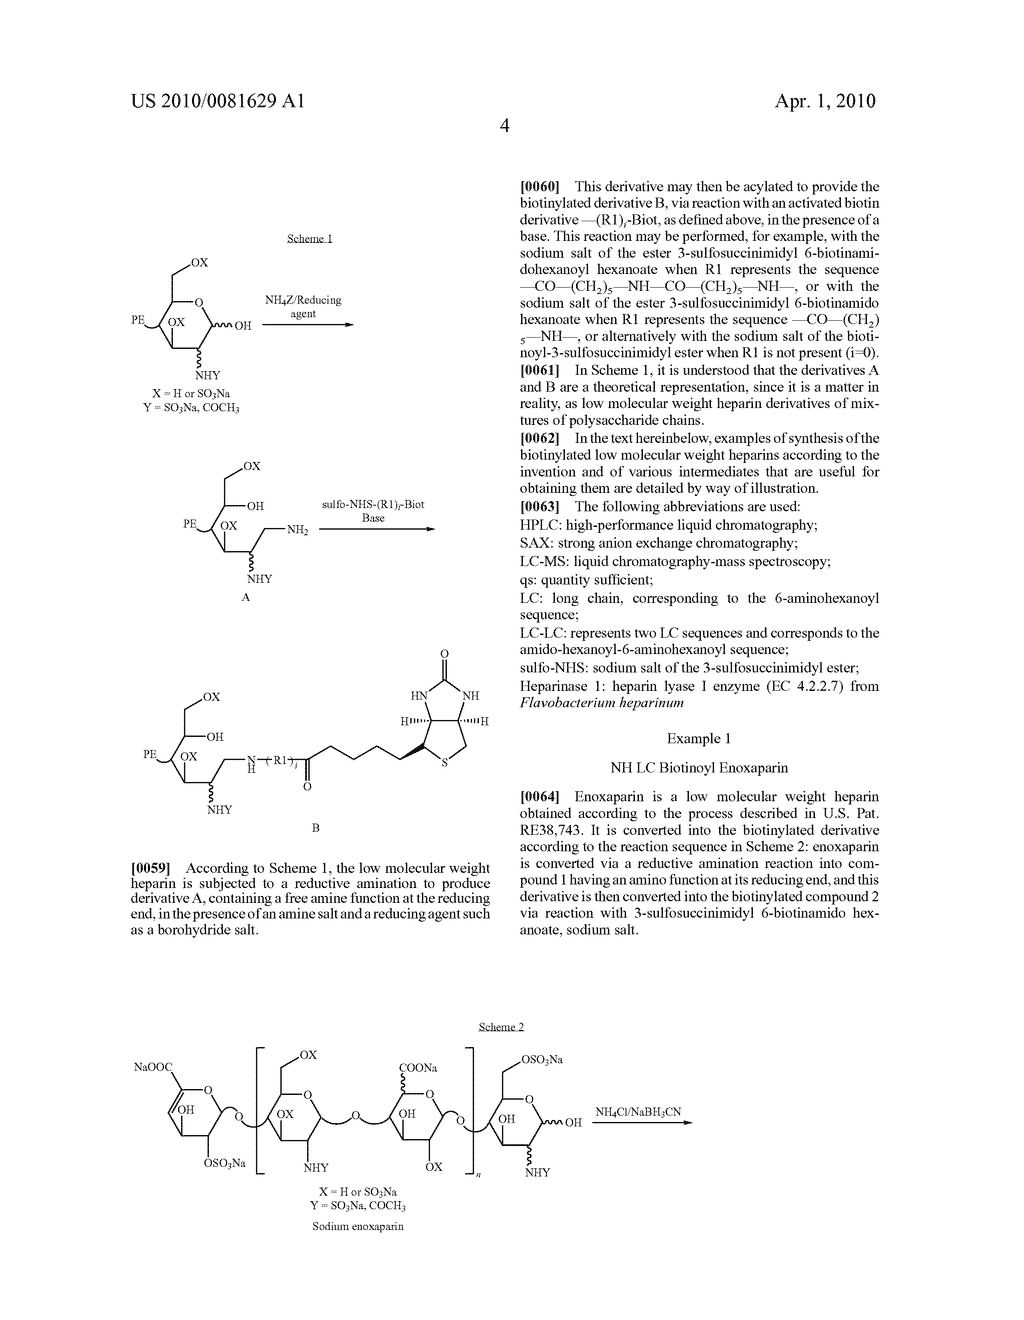 LOW MOLECULAR WEIGHT HEPARINS INCLUDING AT LEAST ONE COVALENT BOND WITH BIOTIN OR A BIOTIN DERIVATIVE, METHOD FOR MAKING SAME AND USE THEREOF - diagram, schematic, and image 09